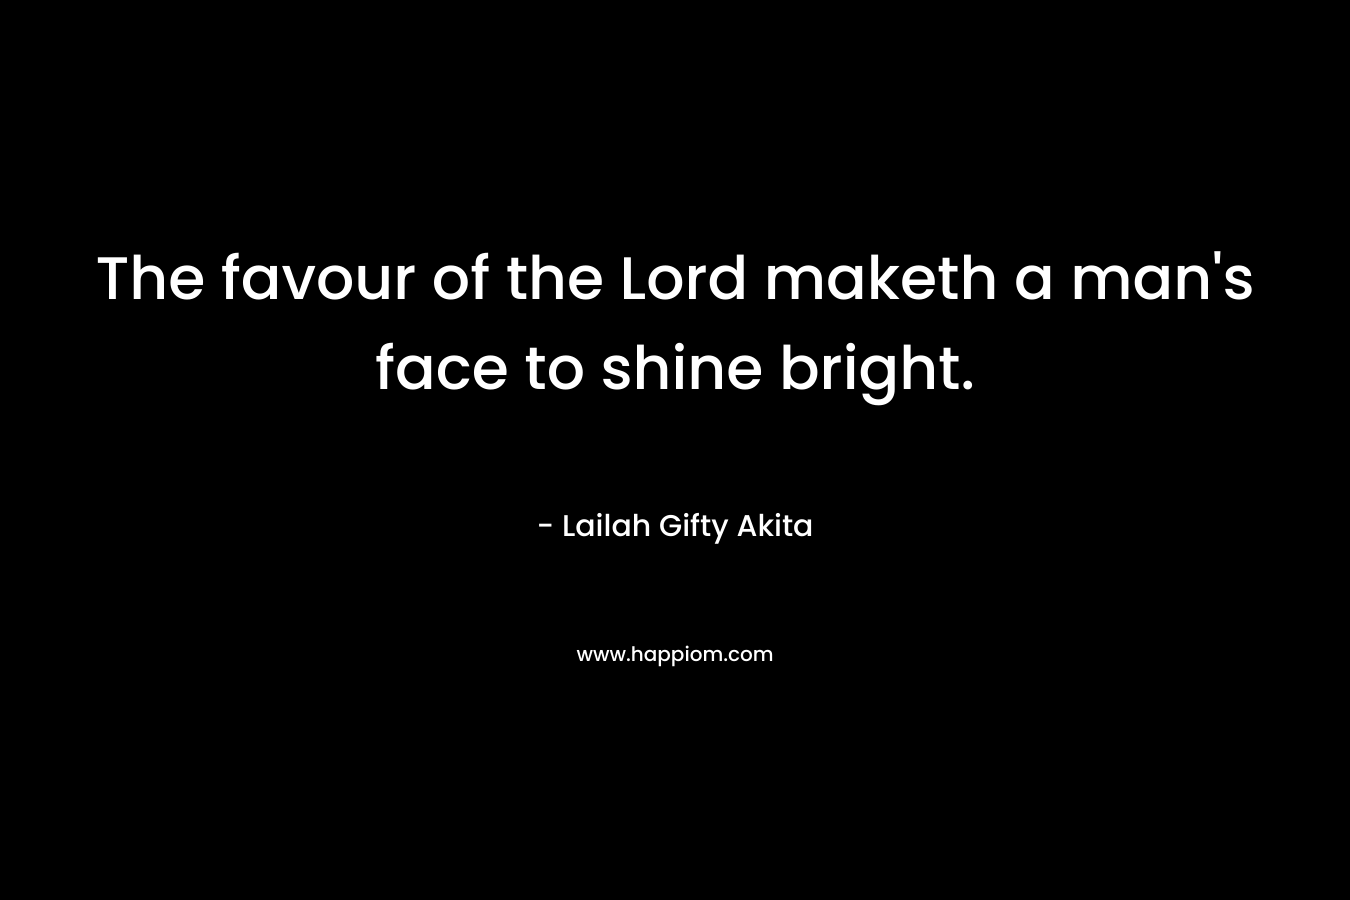 The favour of the Lord maketh a man's face to shine bright.